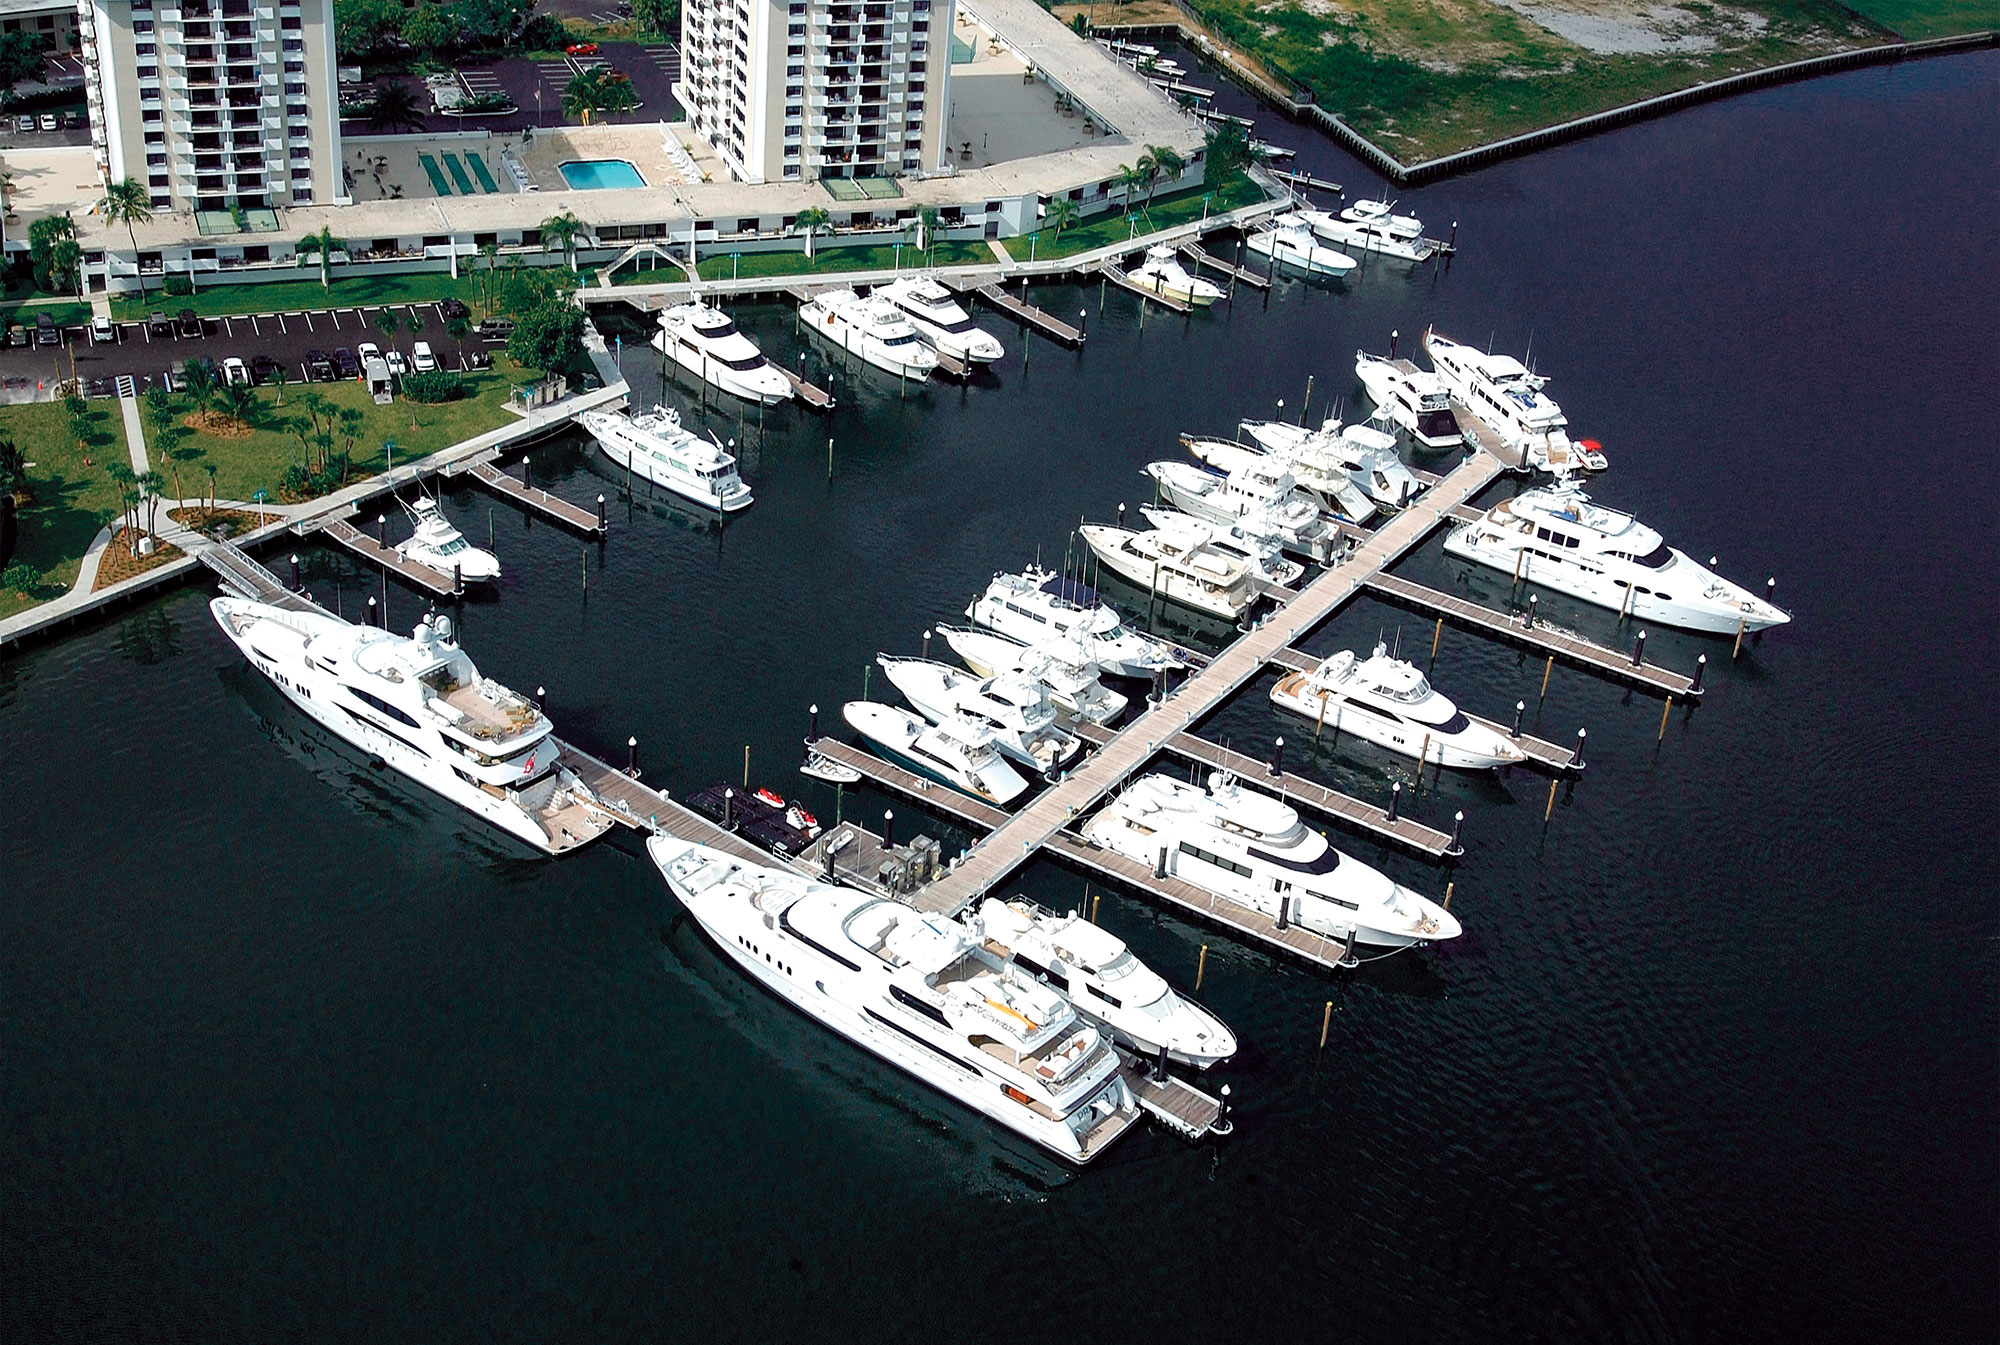 Aluminum floating wave attenuator used as slippage for large yachts in Florida